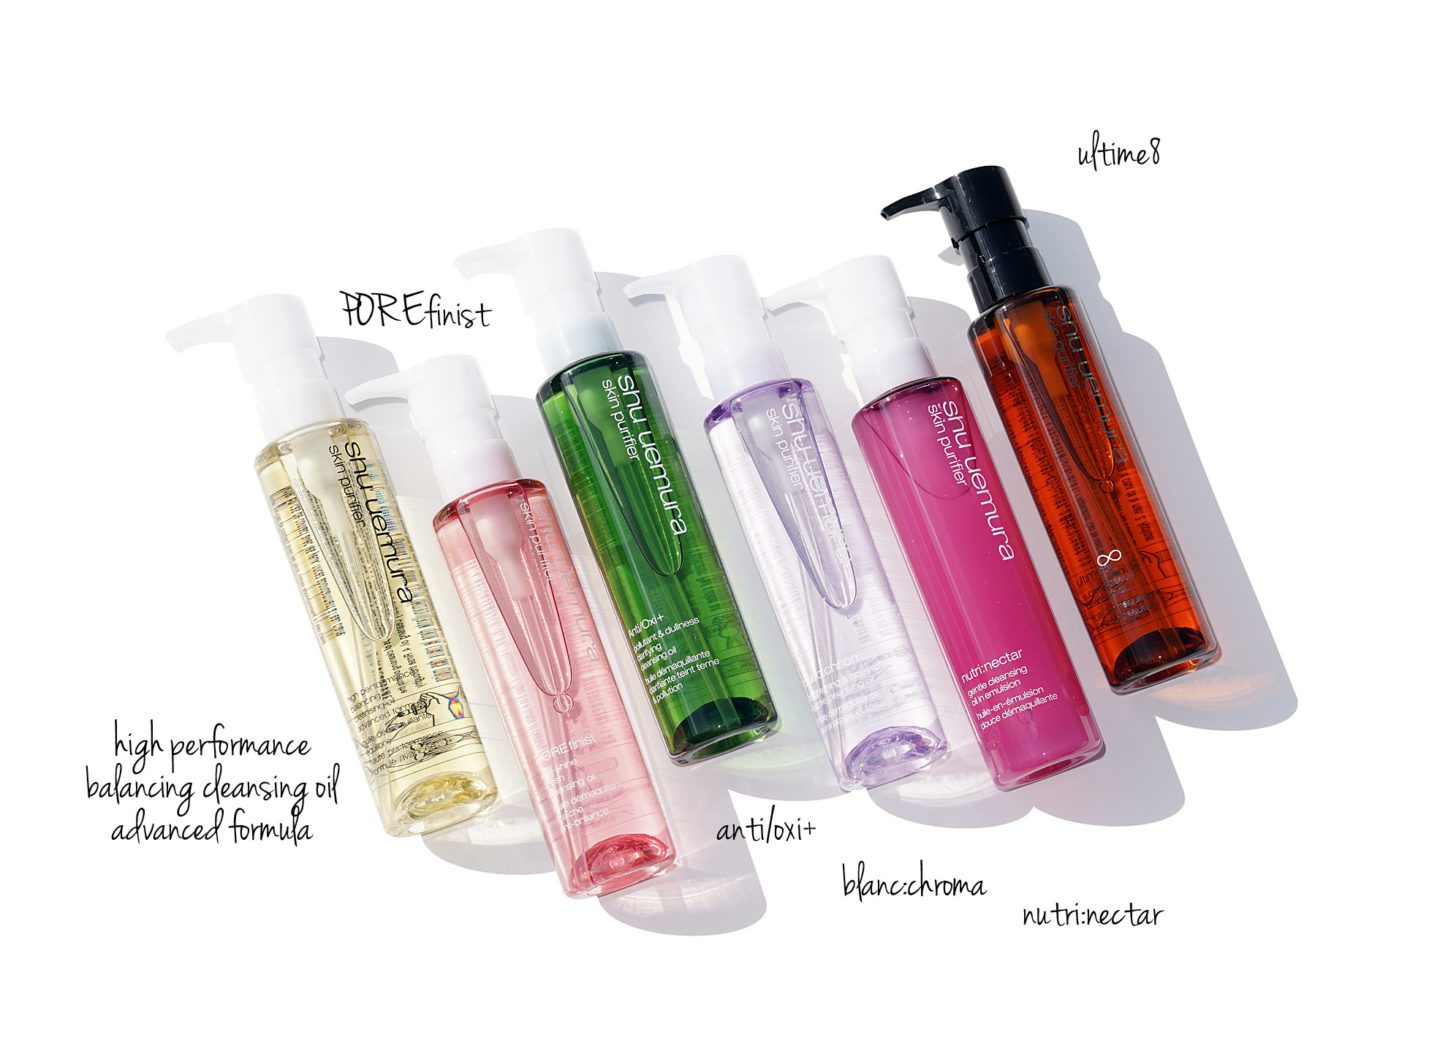 Shu Uemura Cleansing Oil Review | The Beauty Look Book